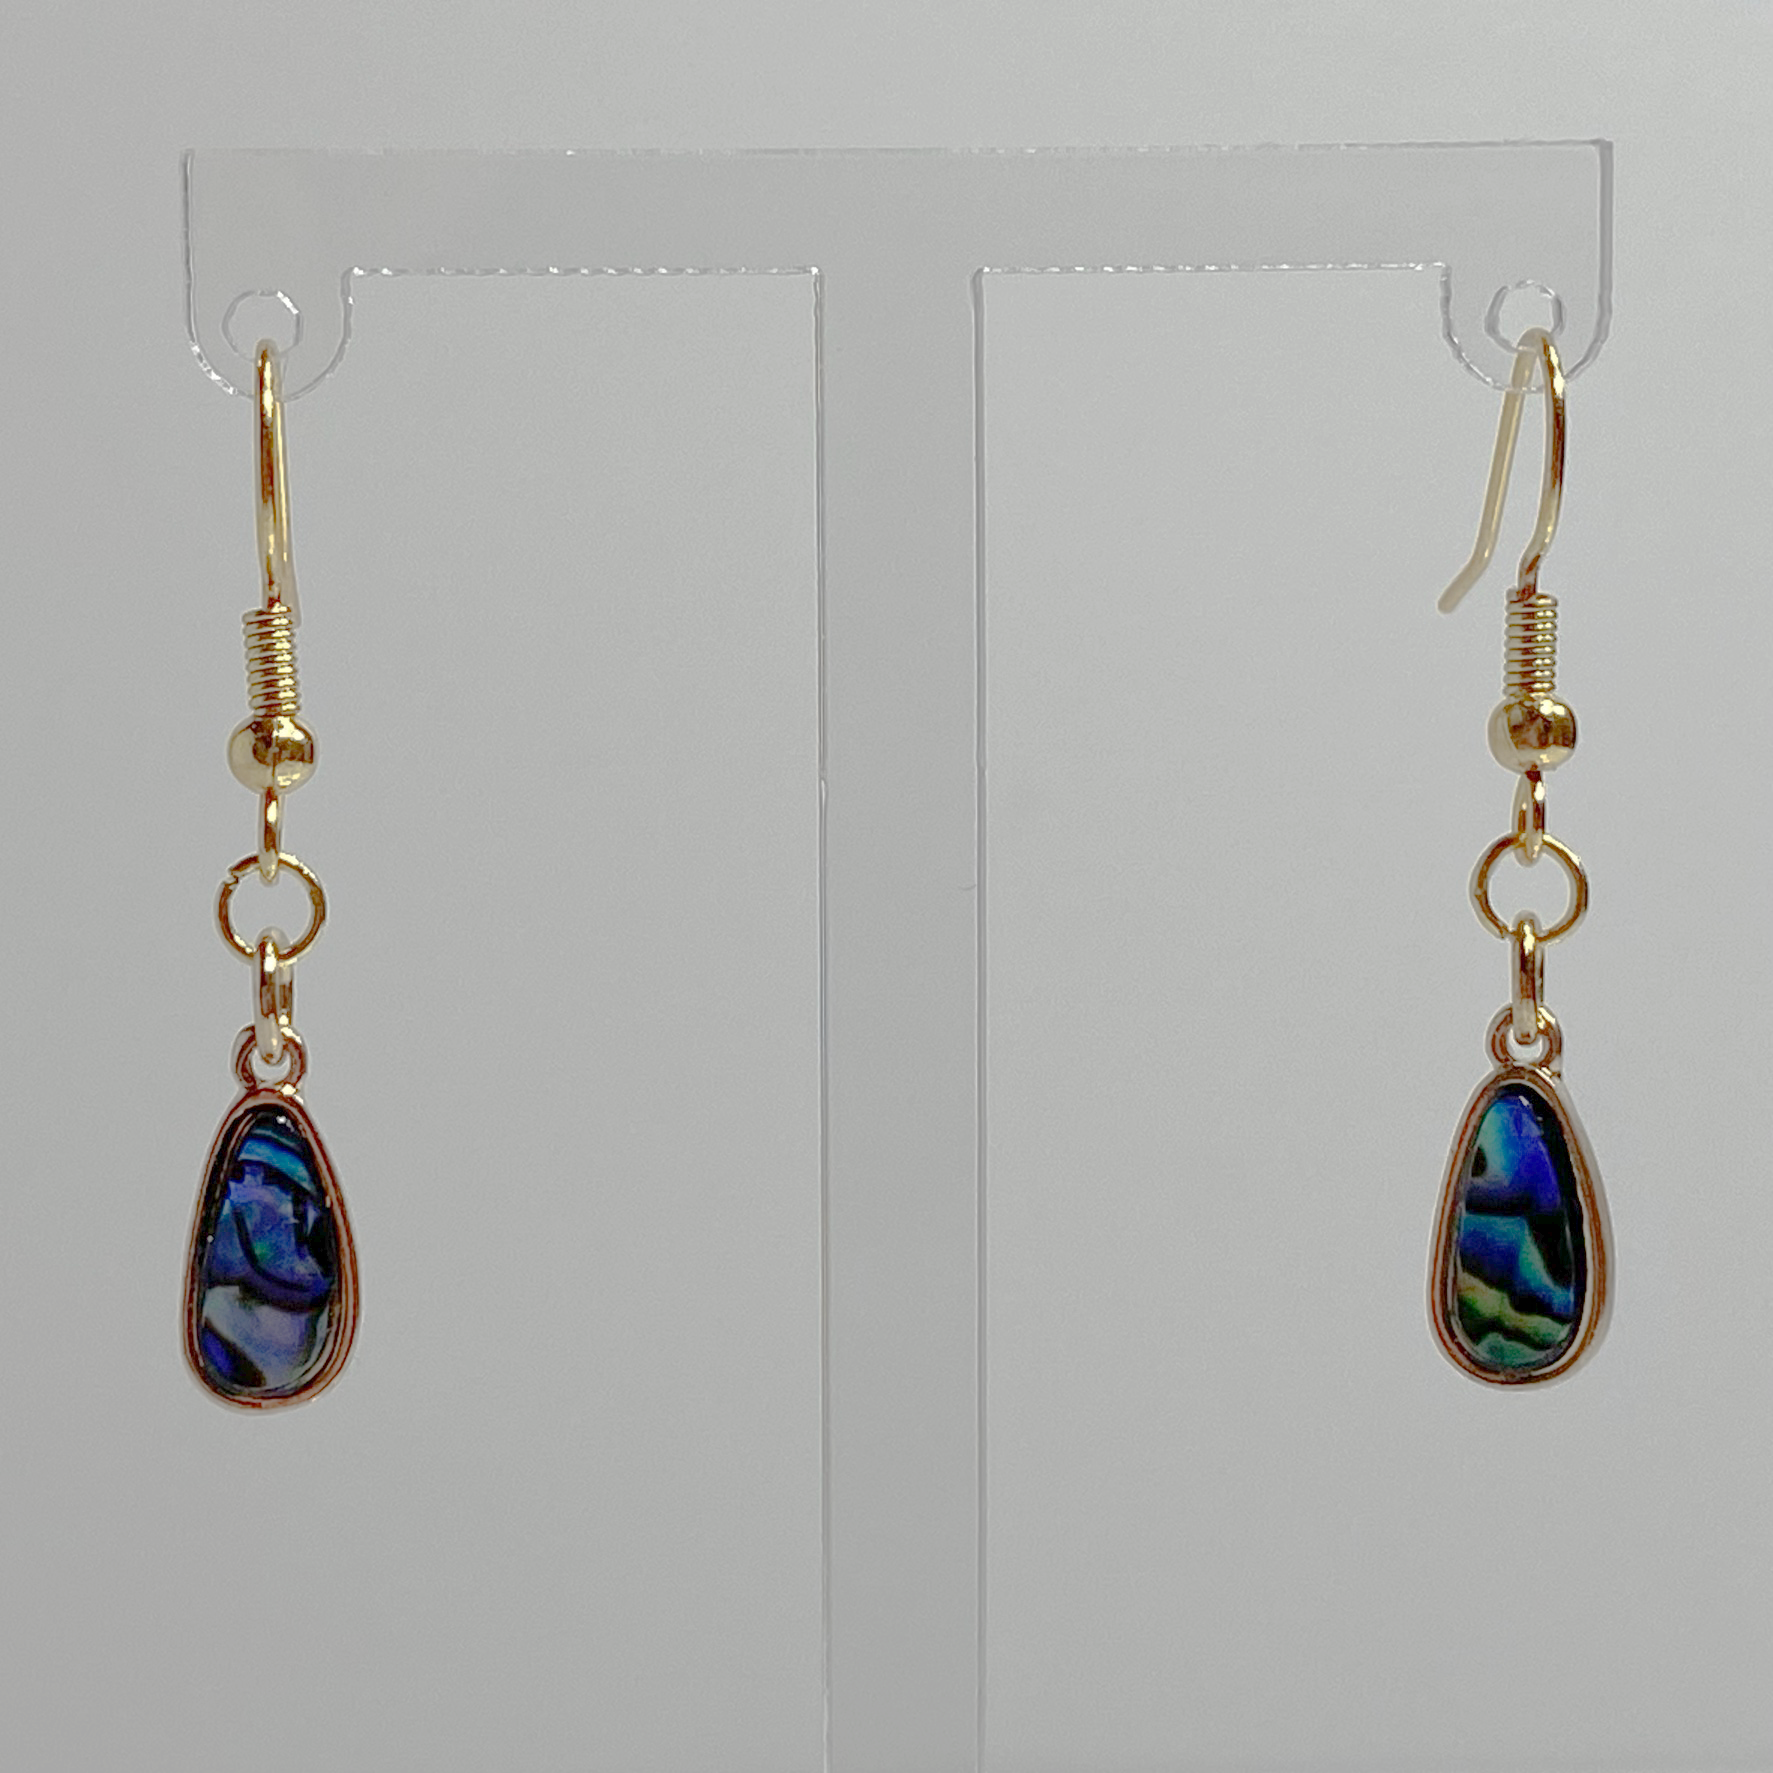 Gold earrings with dangling blue, purple, and green hued marble teardrop charms.